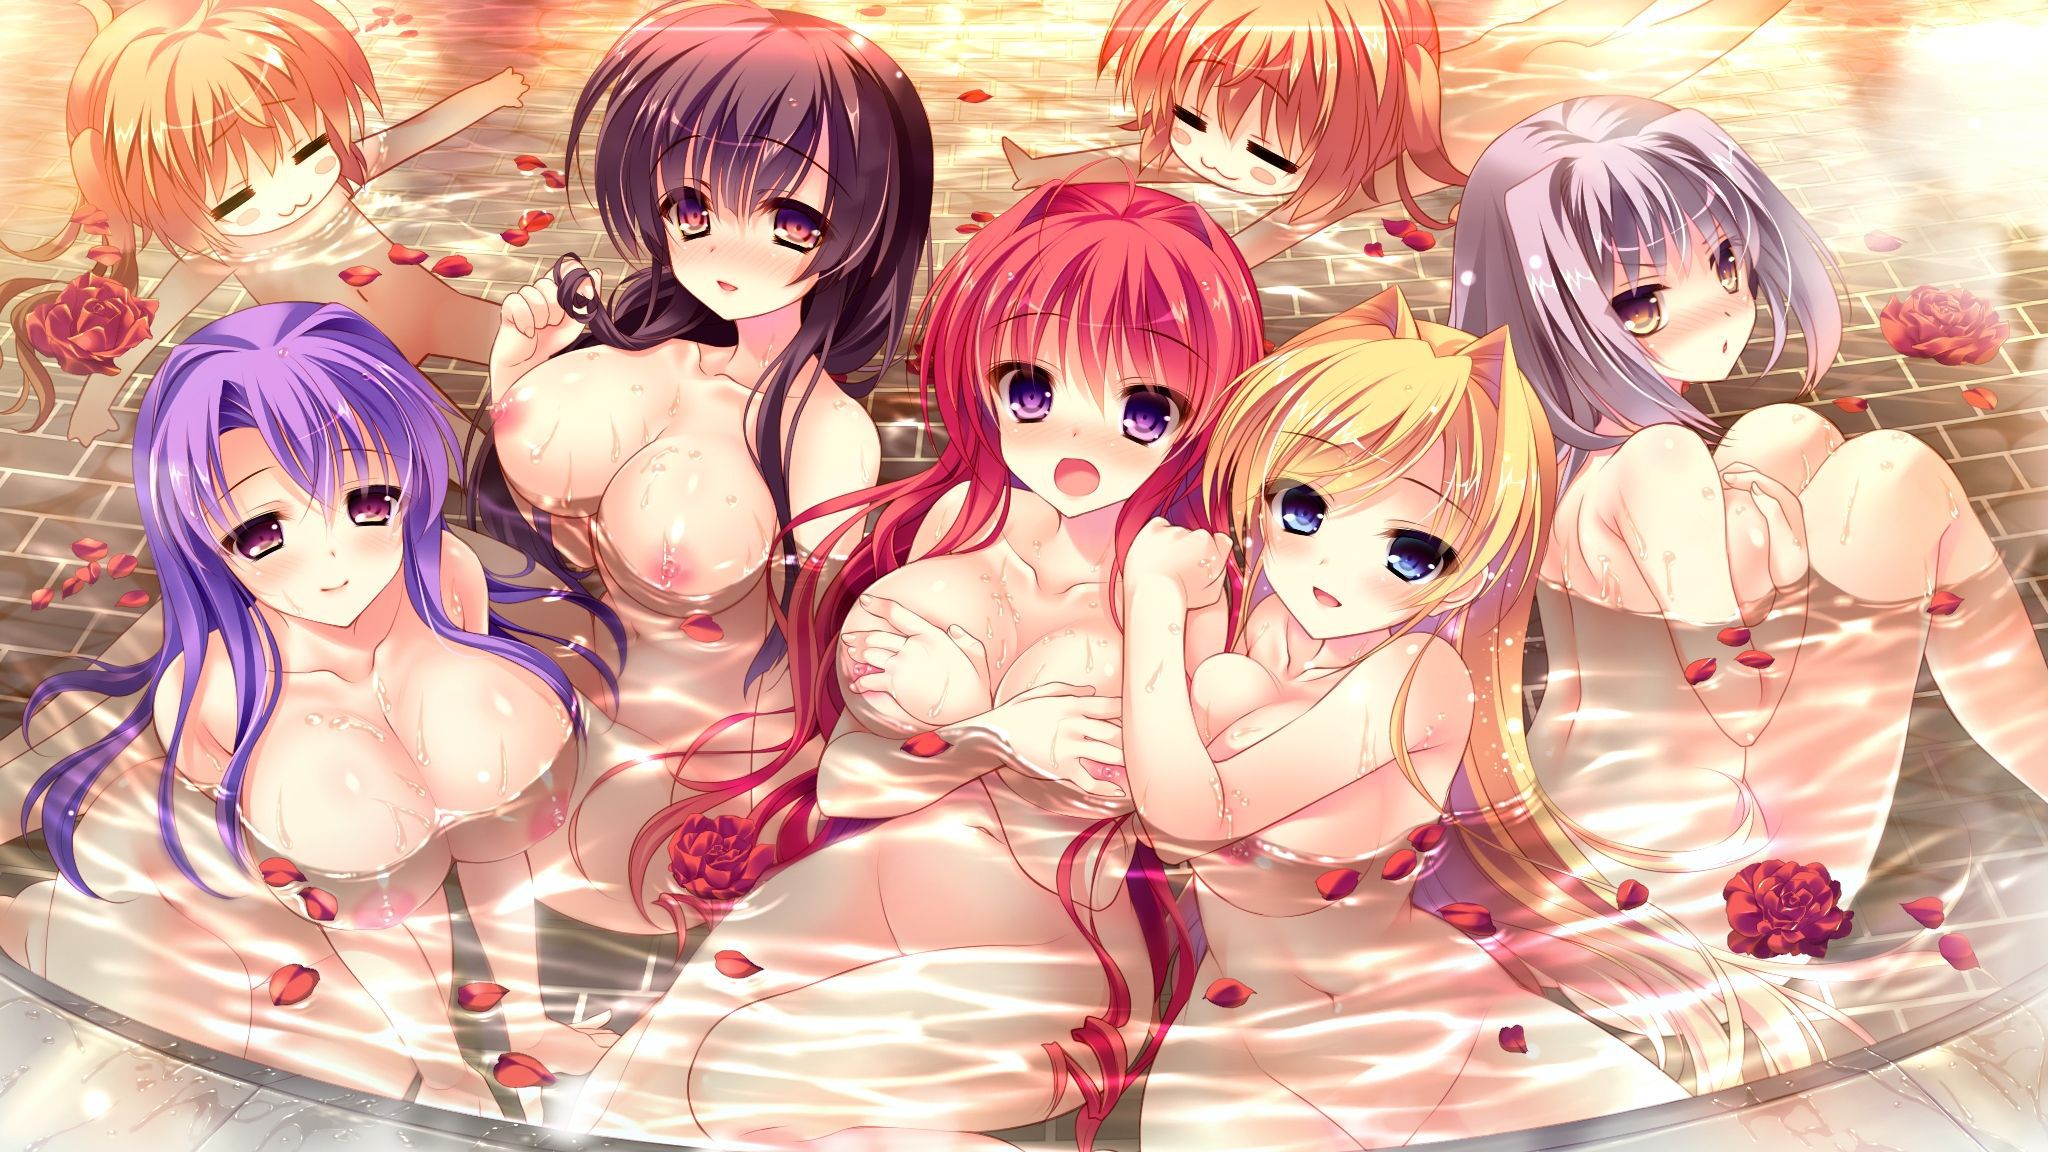 [Secondary ZIP] beautiful girl harem erotic image that you want to experience so good only once 2